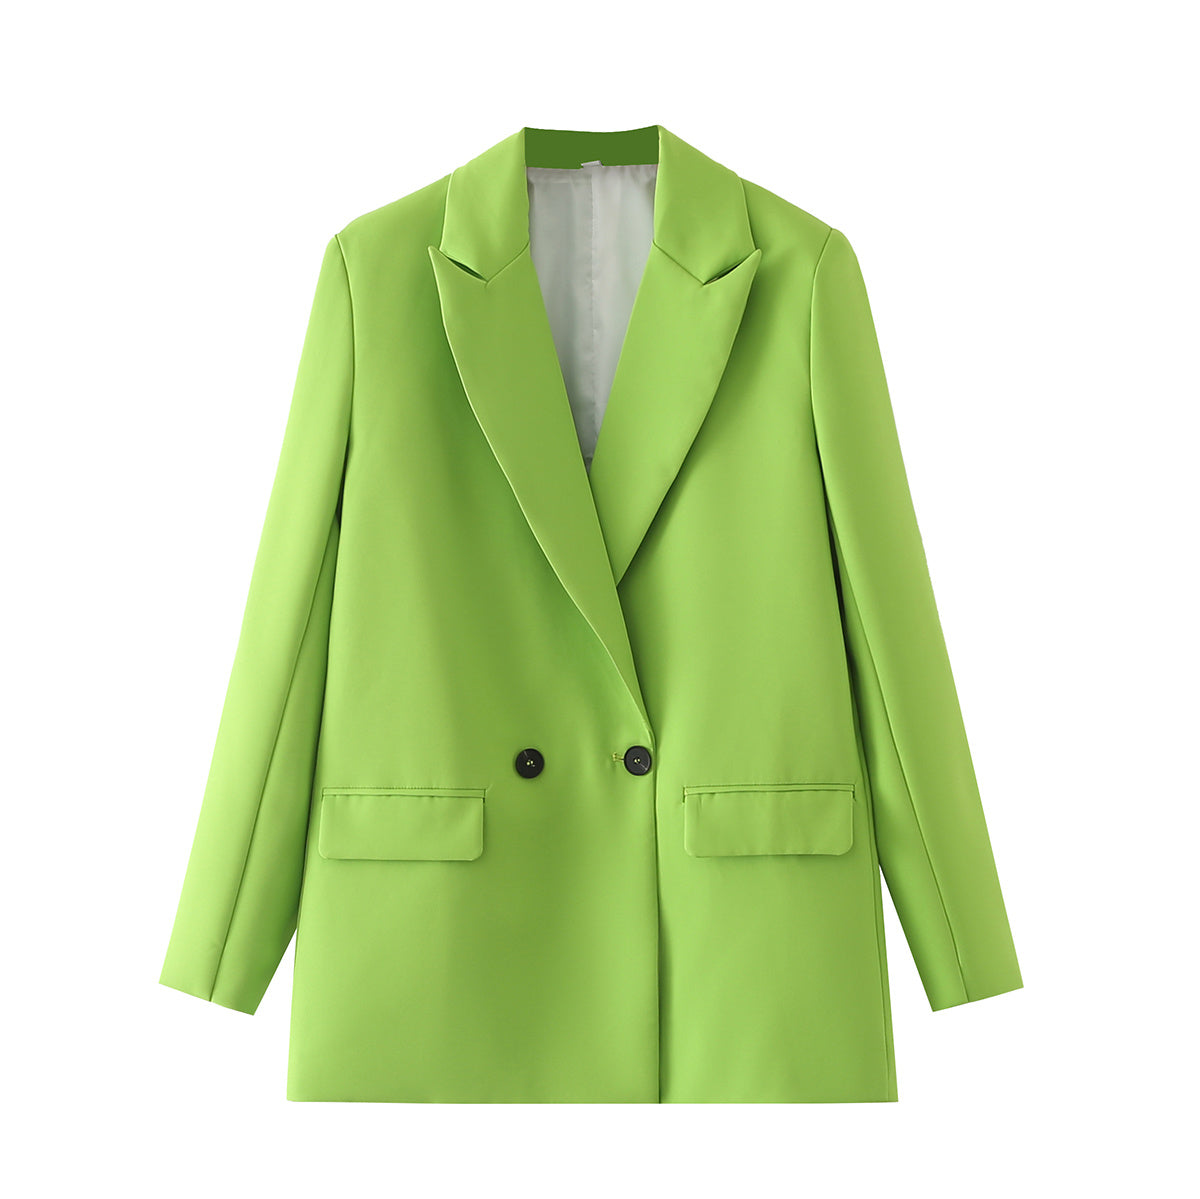 Autumn And Spring Women'S Blazer Jacket Casual Solid Color Double-Breasted Pocket Decorative Coat